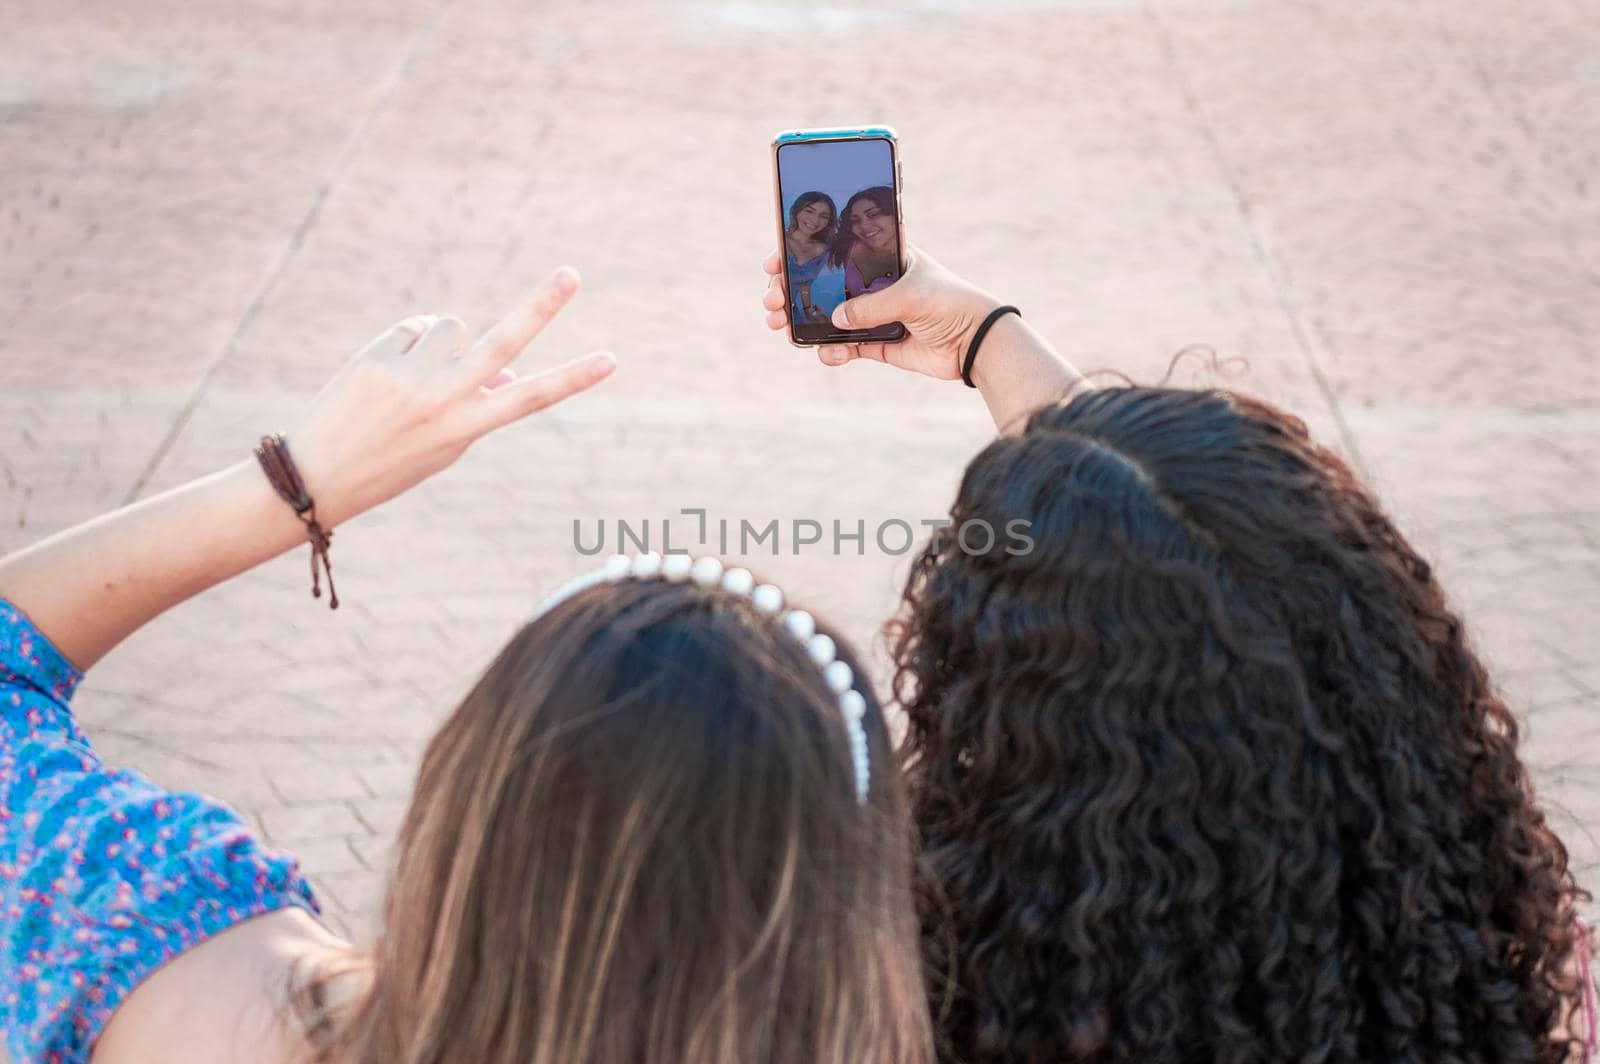 Two pretty girls taking a selfie, two latin girls smiling and taking a selfie, female friendship concept